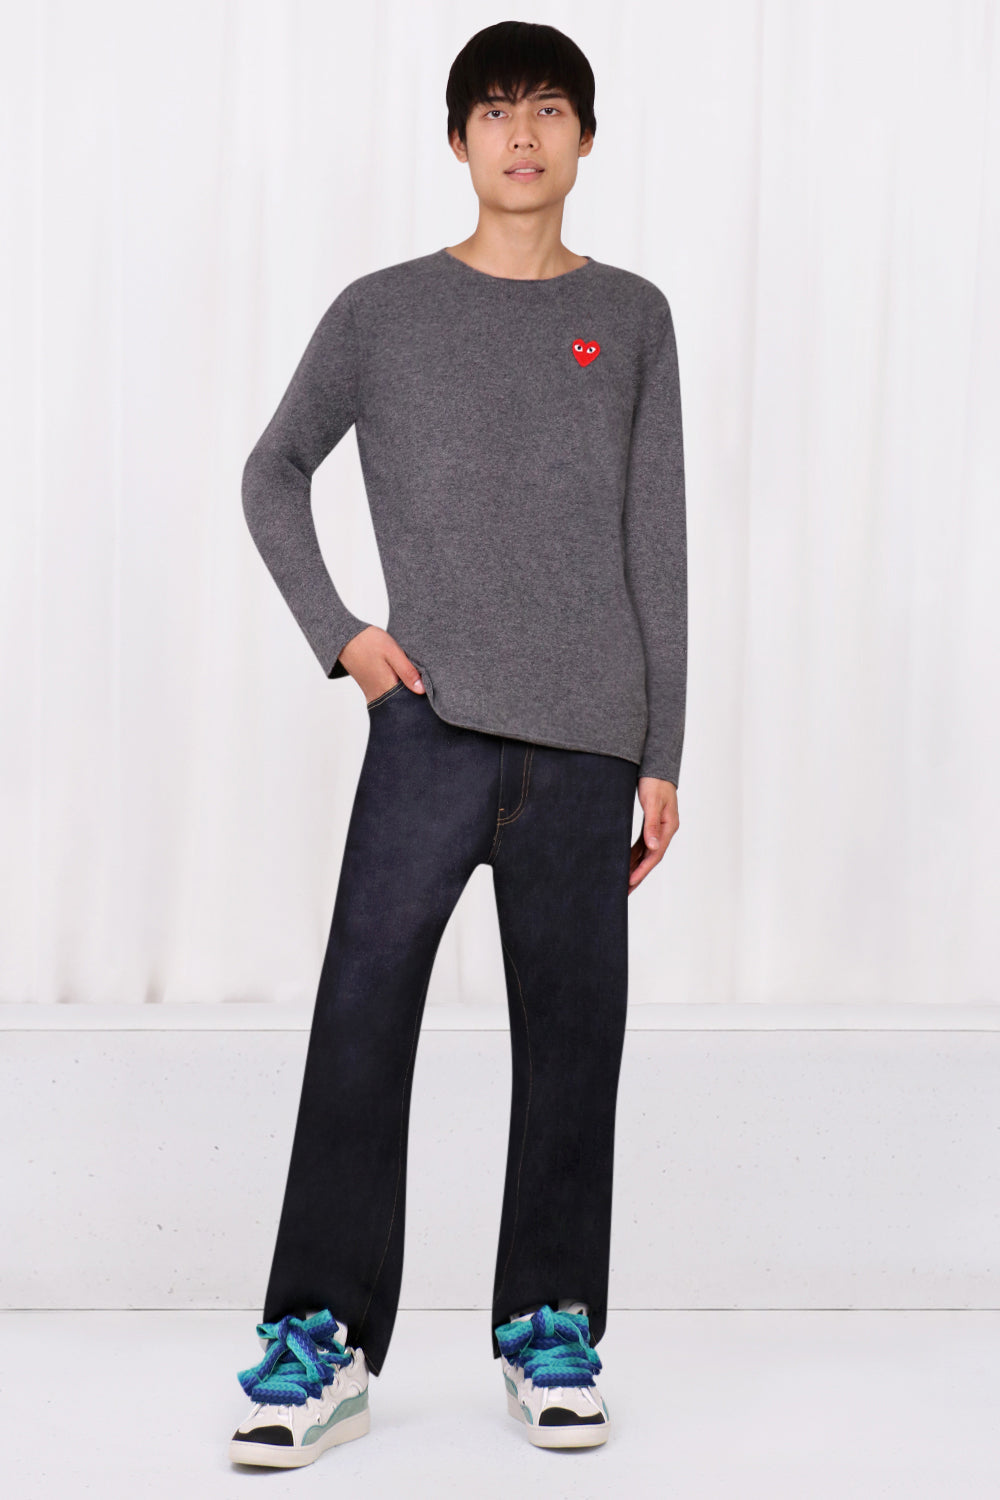 COMME DES GARCONS PLAY RTW PLAY MENS CREWNECK HEART KNIT | GREY